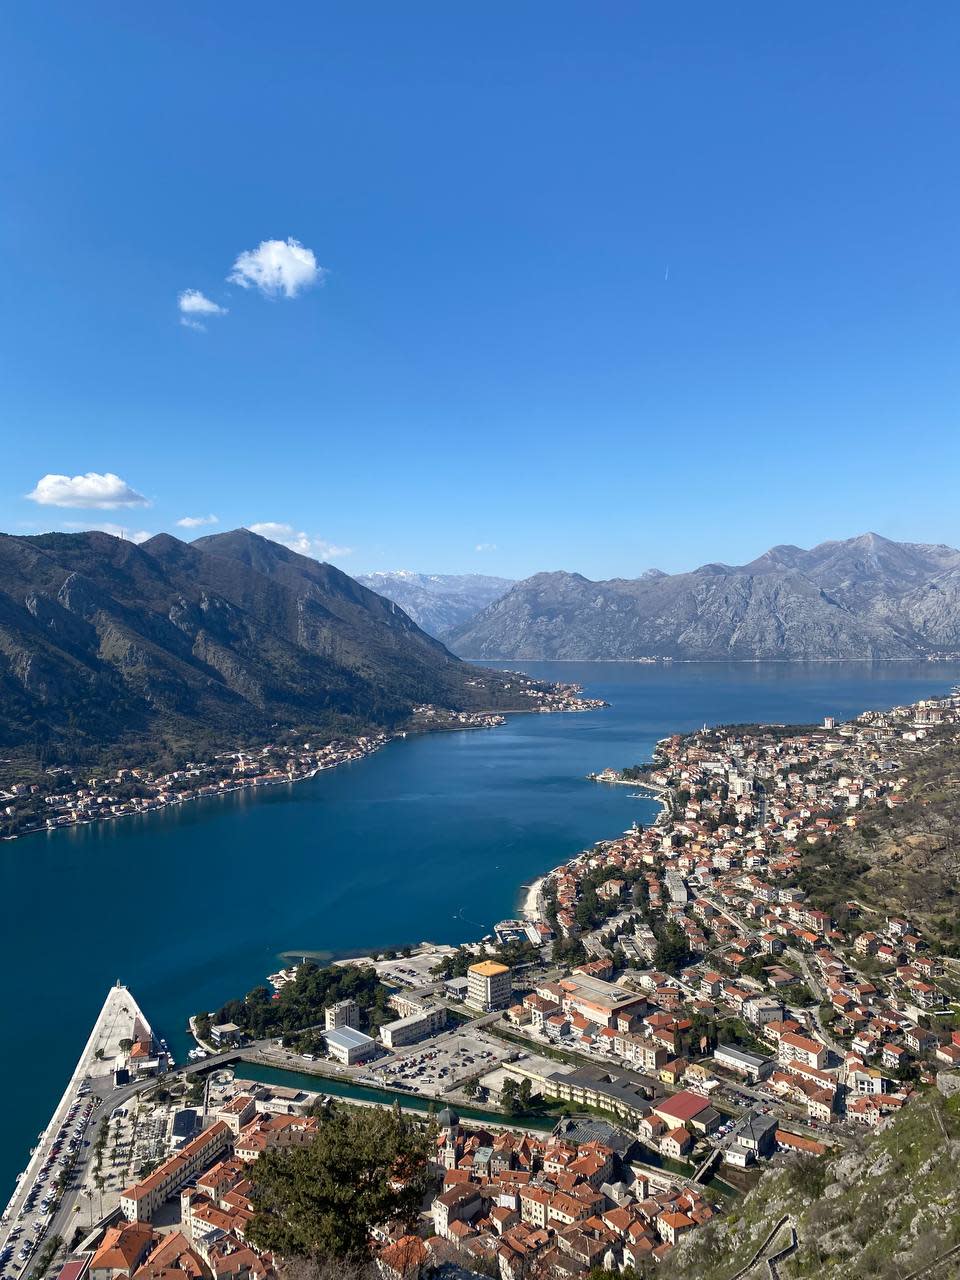 <title>The view from Old Town, Kotor | Eugene R.</title>